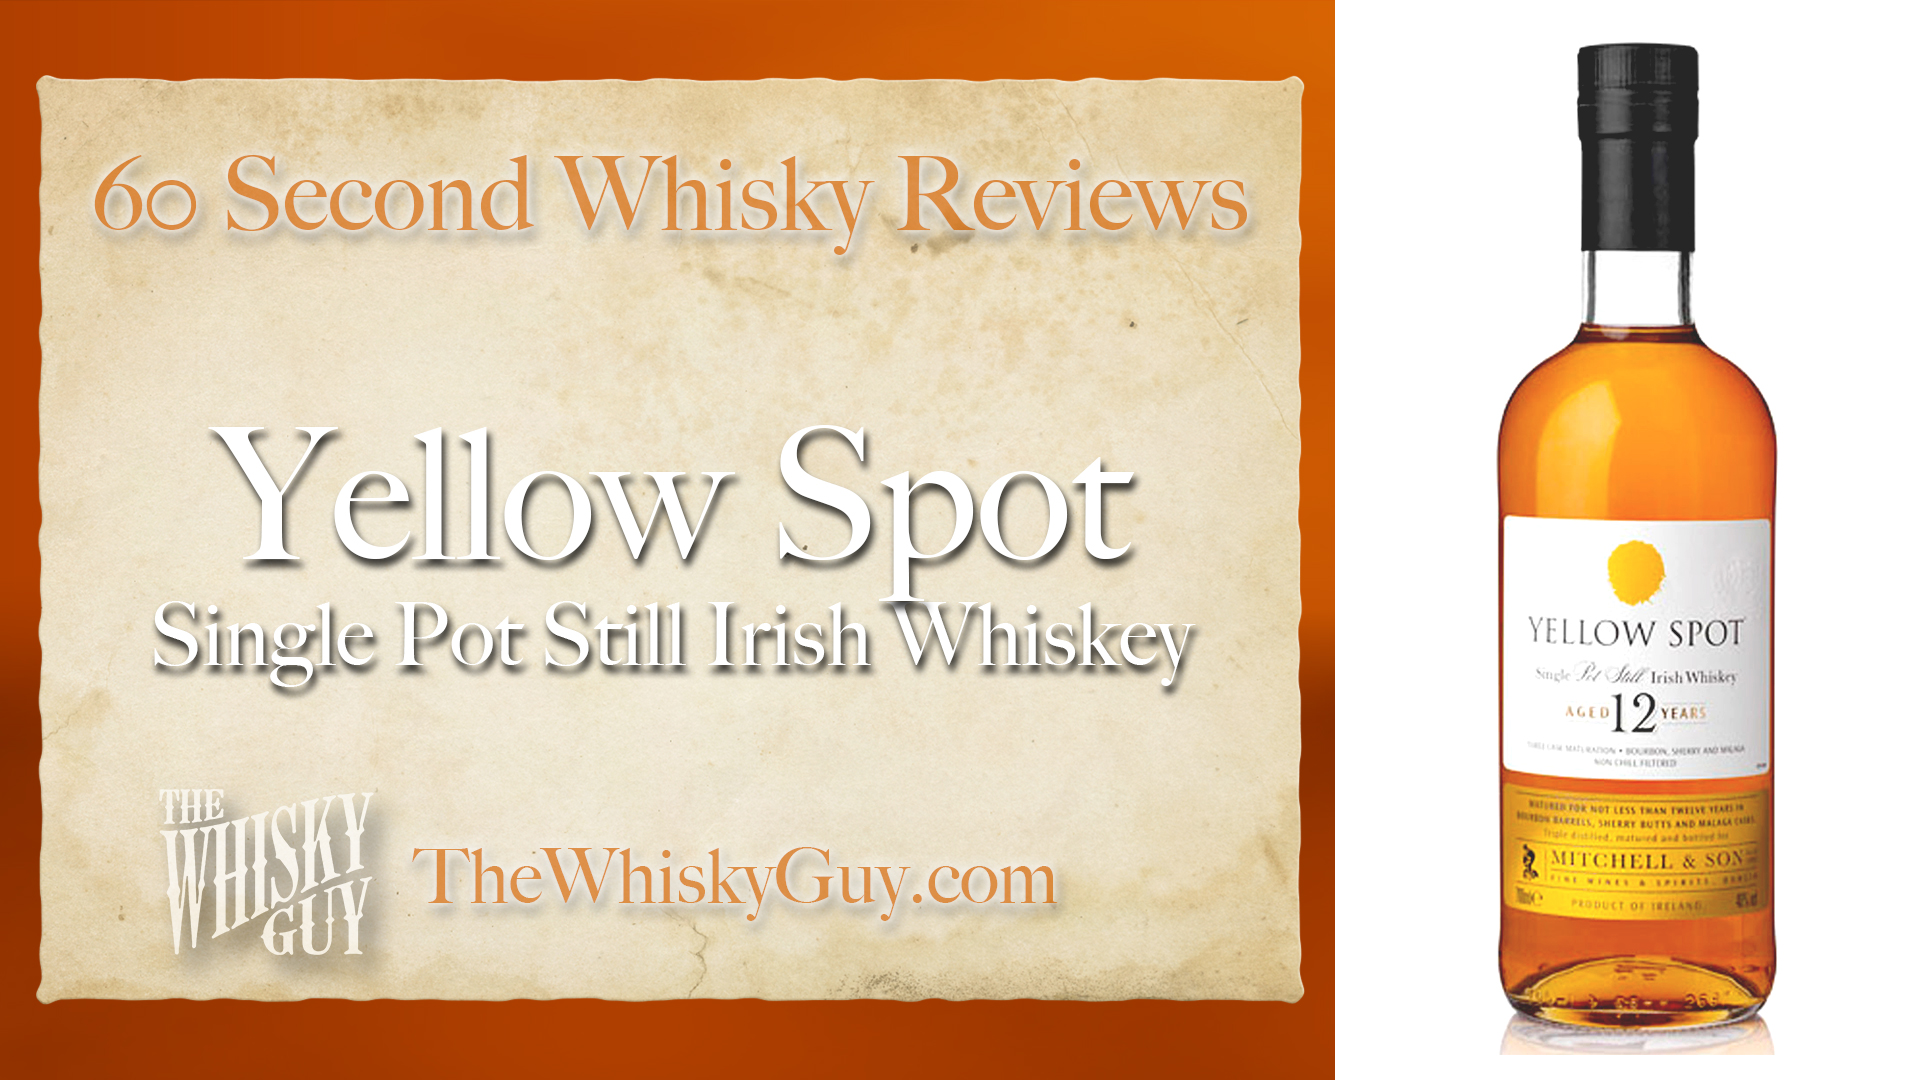 Does Yellow Spot Irish Whiskey belong in your liquor cabinet? Is it worth the price at the bar? Give The Whisky Guy 60 seconds and find out! In just 60 seconds, The Whisky Guy reviews Irish Whiskey, Scotch Whisky, Single Malt, Canadian Whisky, Bourbon Whiskey, Japanese Whisky and other whiskies from around the world. Find more at TheWhiskyGuy.com. All original content © Ari Shapiro - TheWhiskyGuy.com